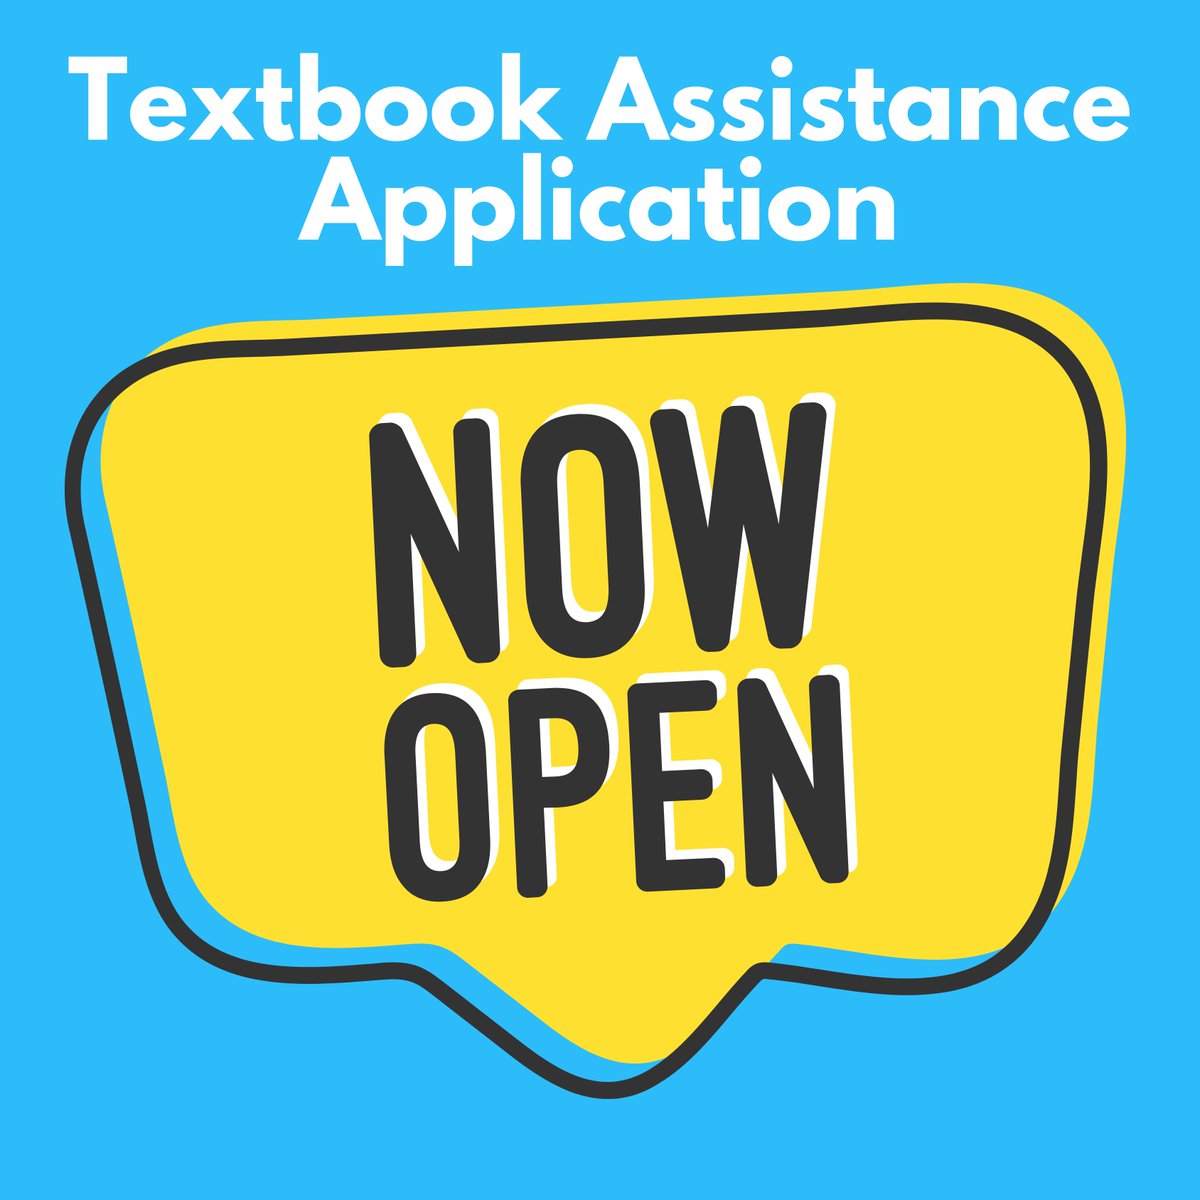 Textbook Assistance Application is now open. Apply now - nscc.edu/student-experi…. #NashvilleState #StudentResources #TextbookAssistance